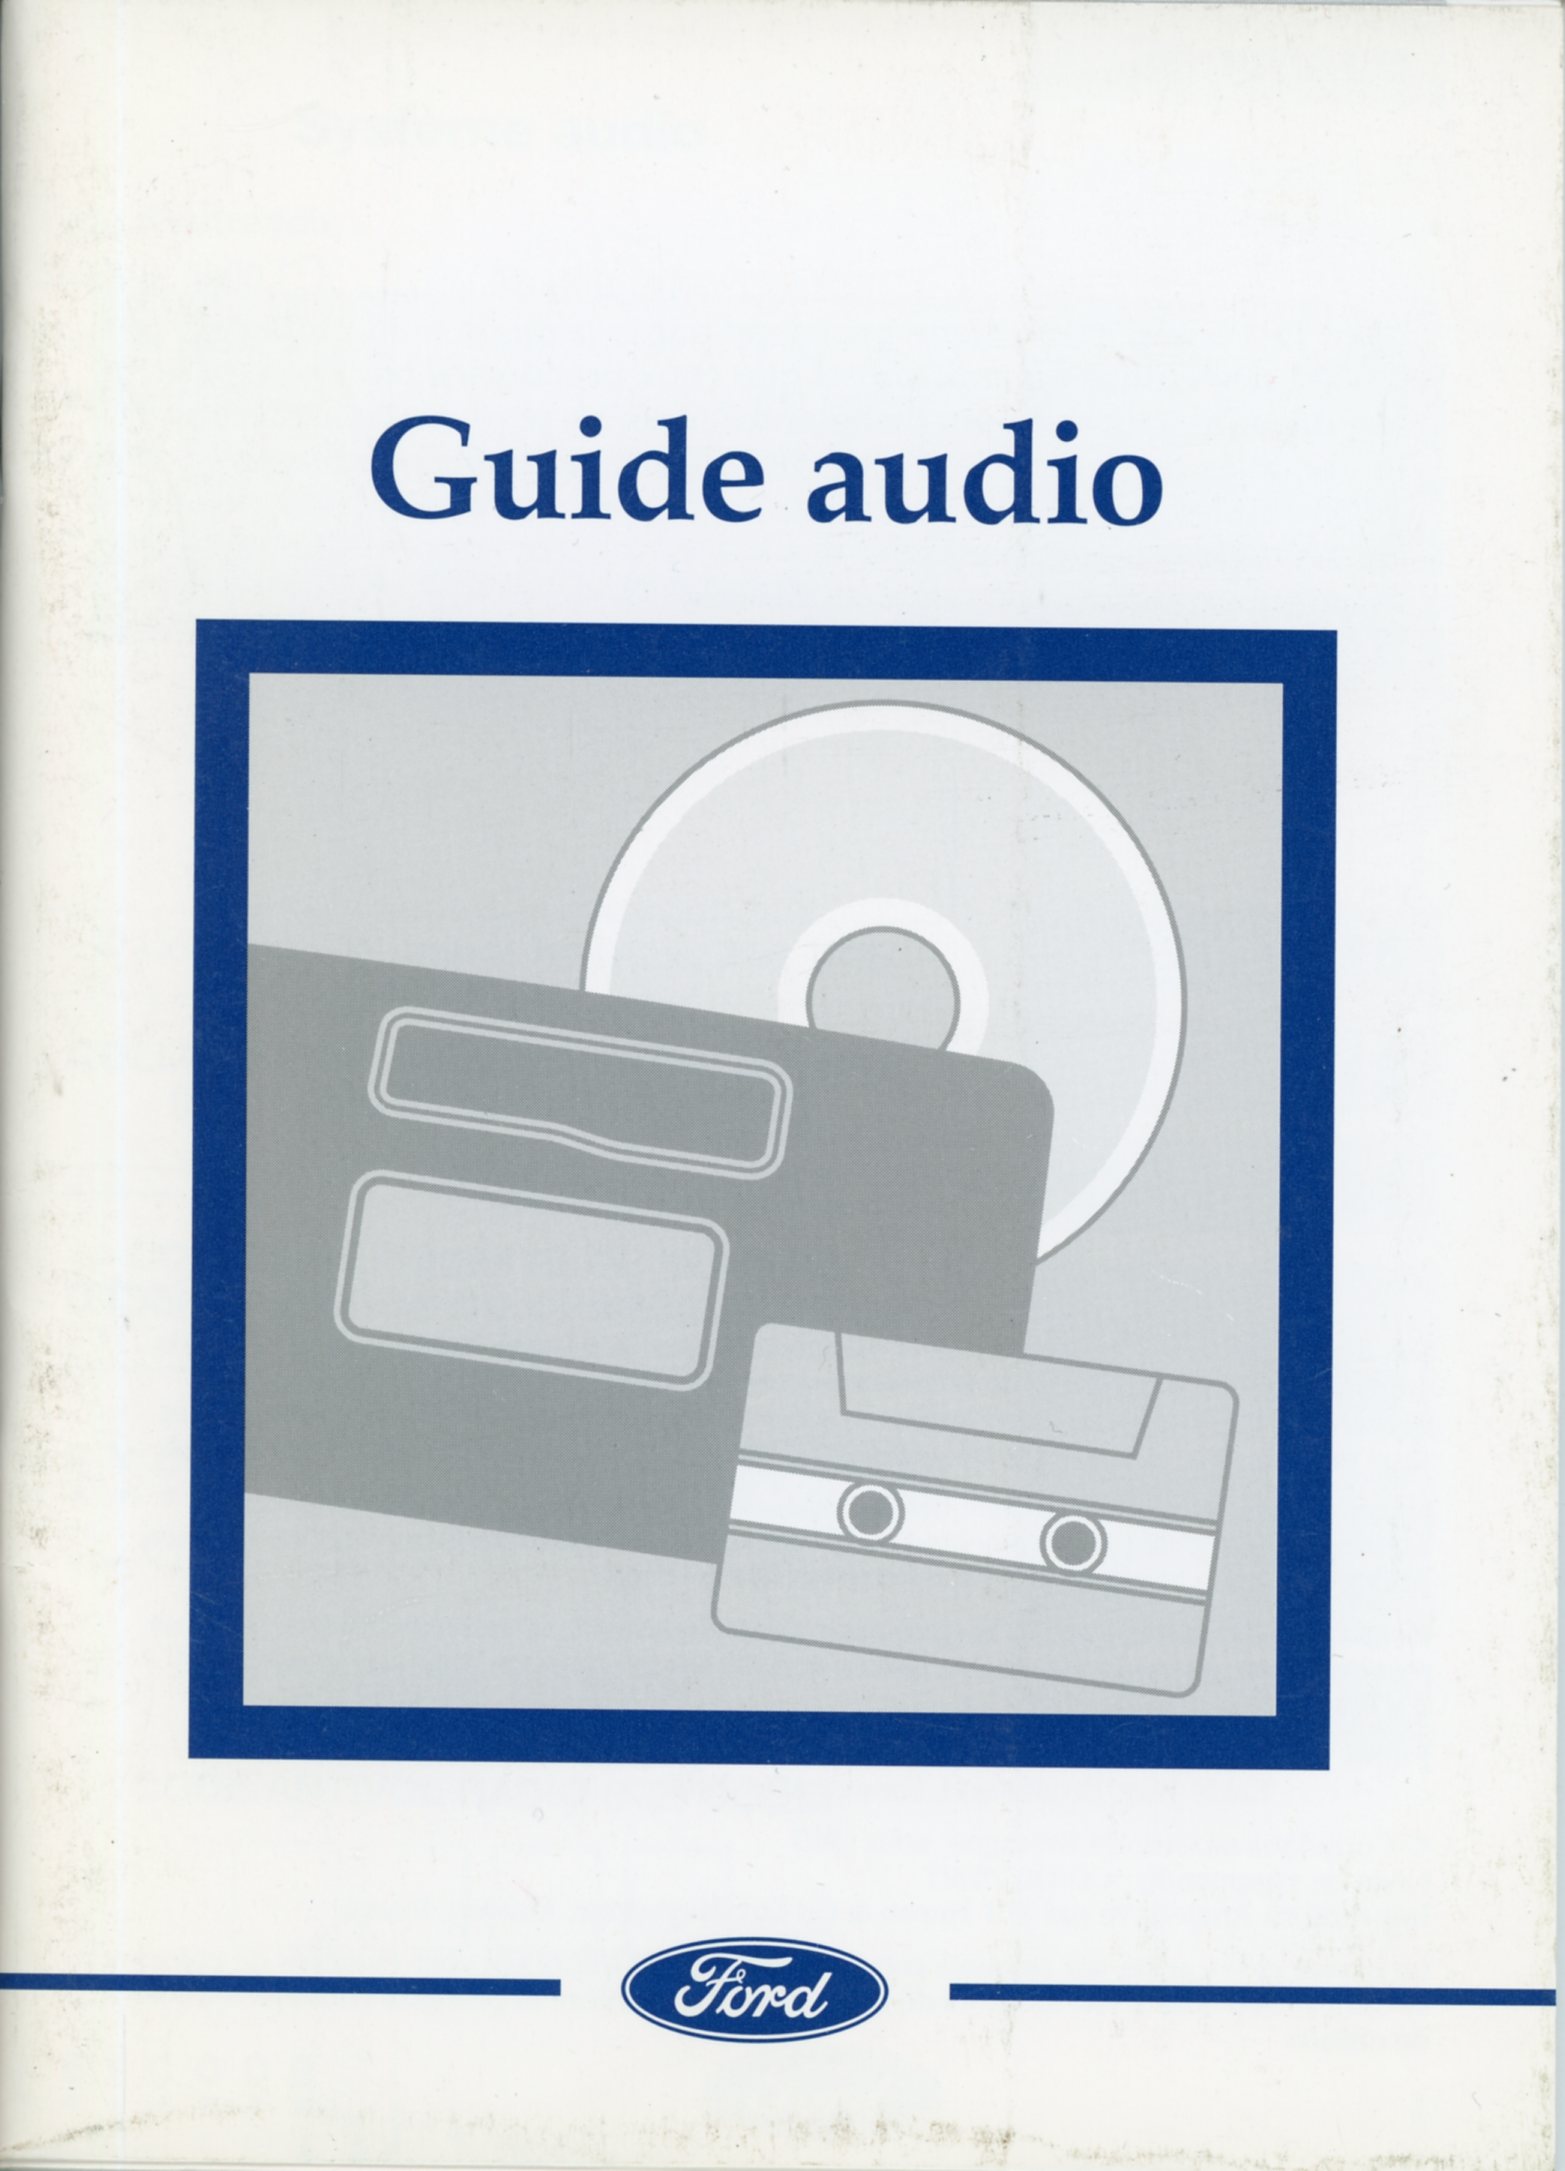 FORD GUIDE AUDIO 1000 3000 4000 TRAFFIC 5000 6000 7000 RDS-EON CHARGEUR CD 2060 2062